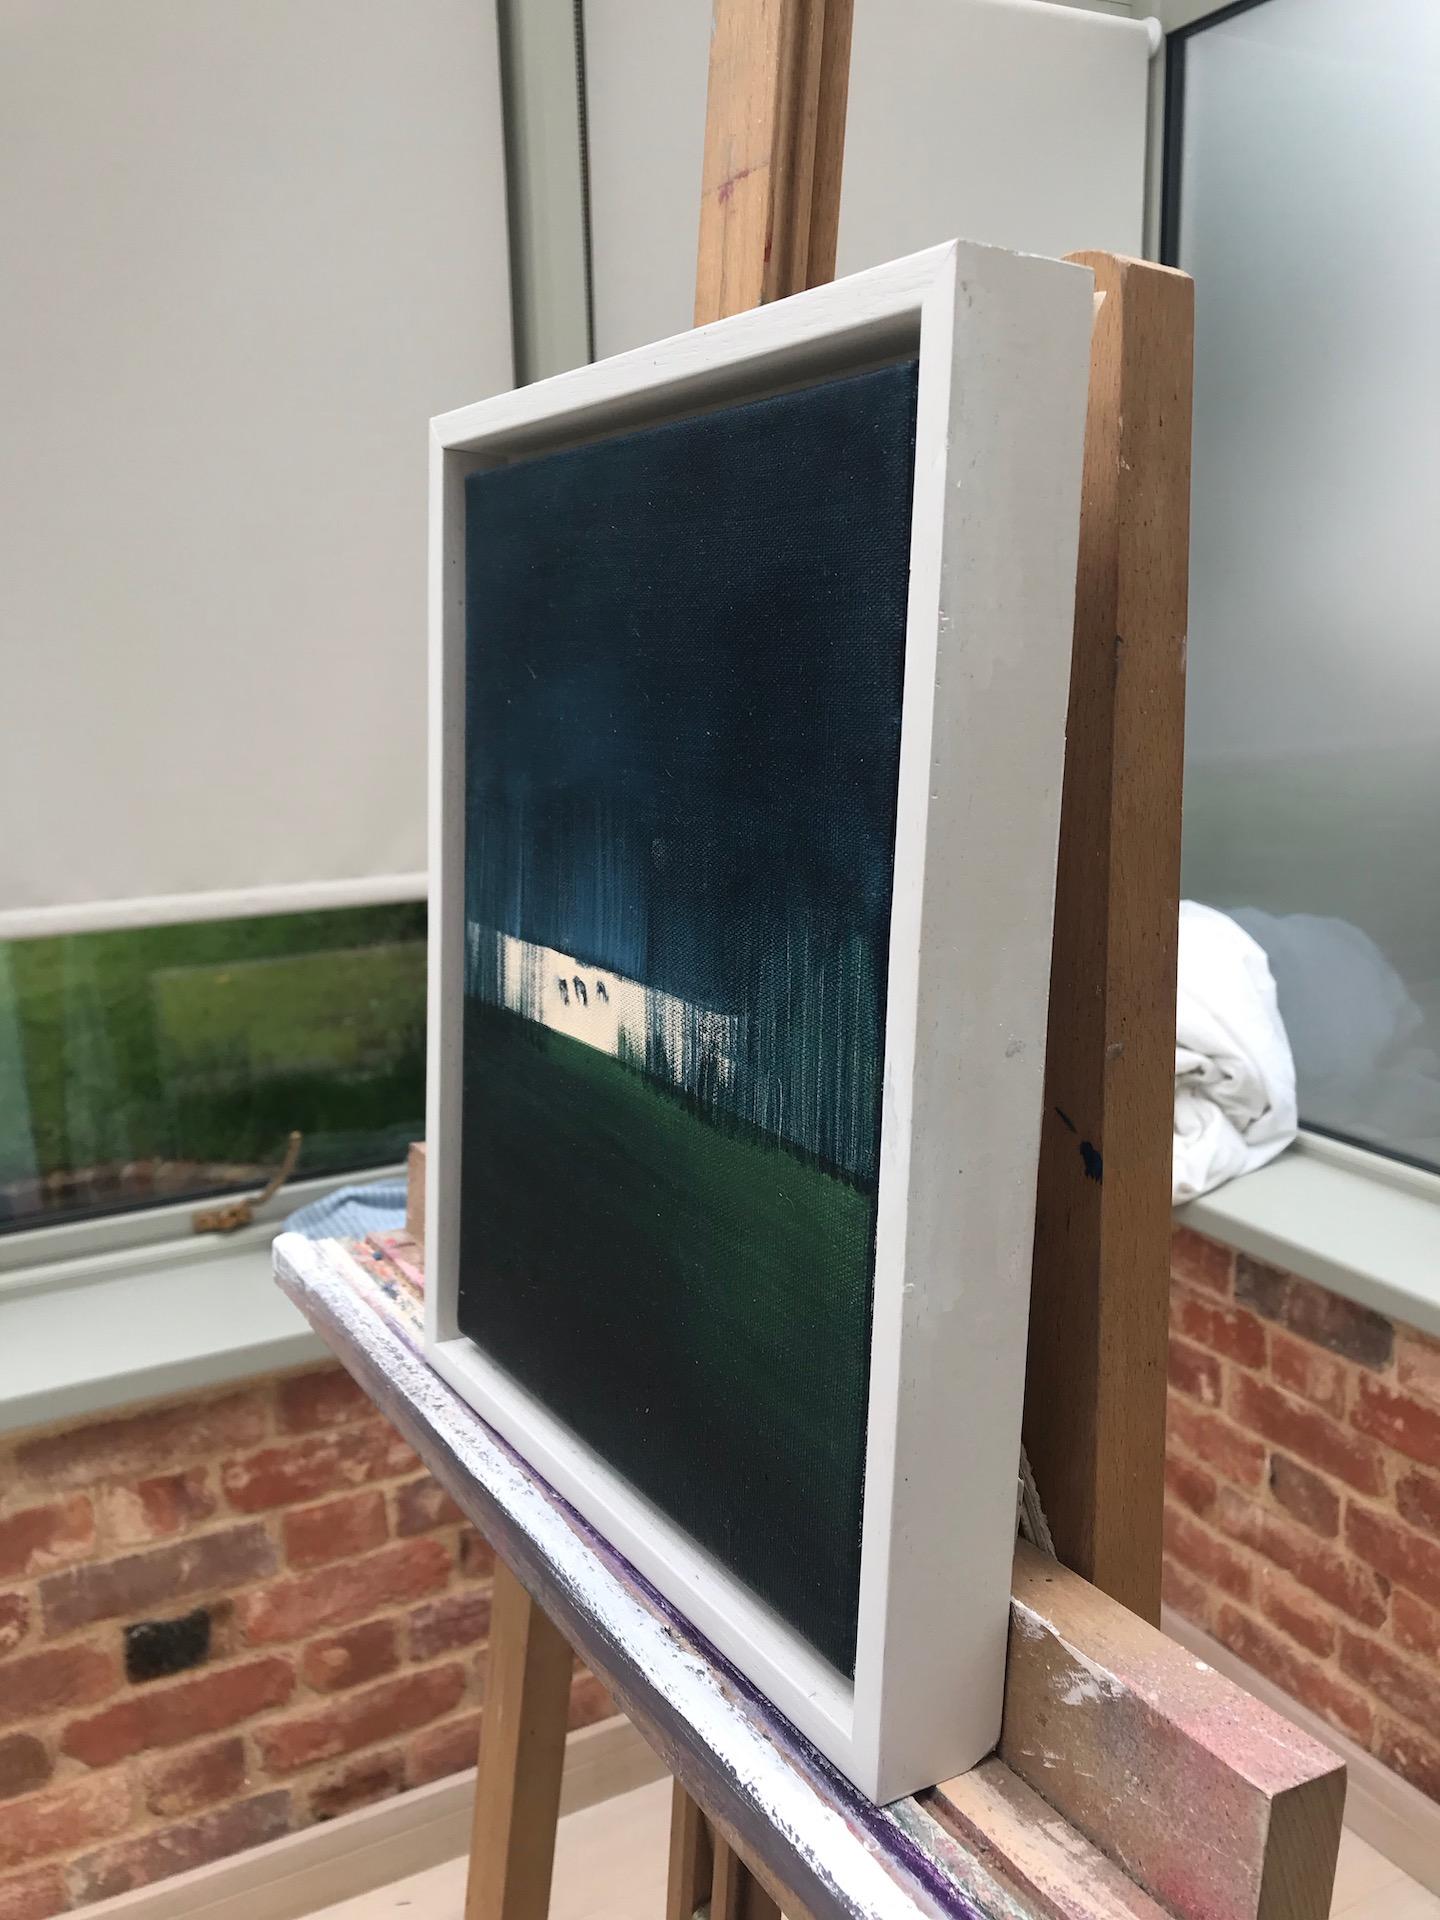 Relinquishment 2 by Emma Hartley 
Hand signed by the artist 
Original landscape Painting
Oil on Linen
H30 W24 D2 cm
Framed size H34 W28 D4 cm
Sold framed in a White box frame
Relinquishment 2 and original landscape painting inspired by th light